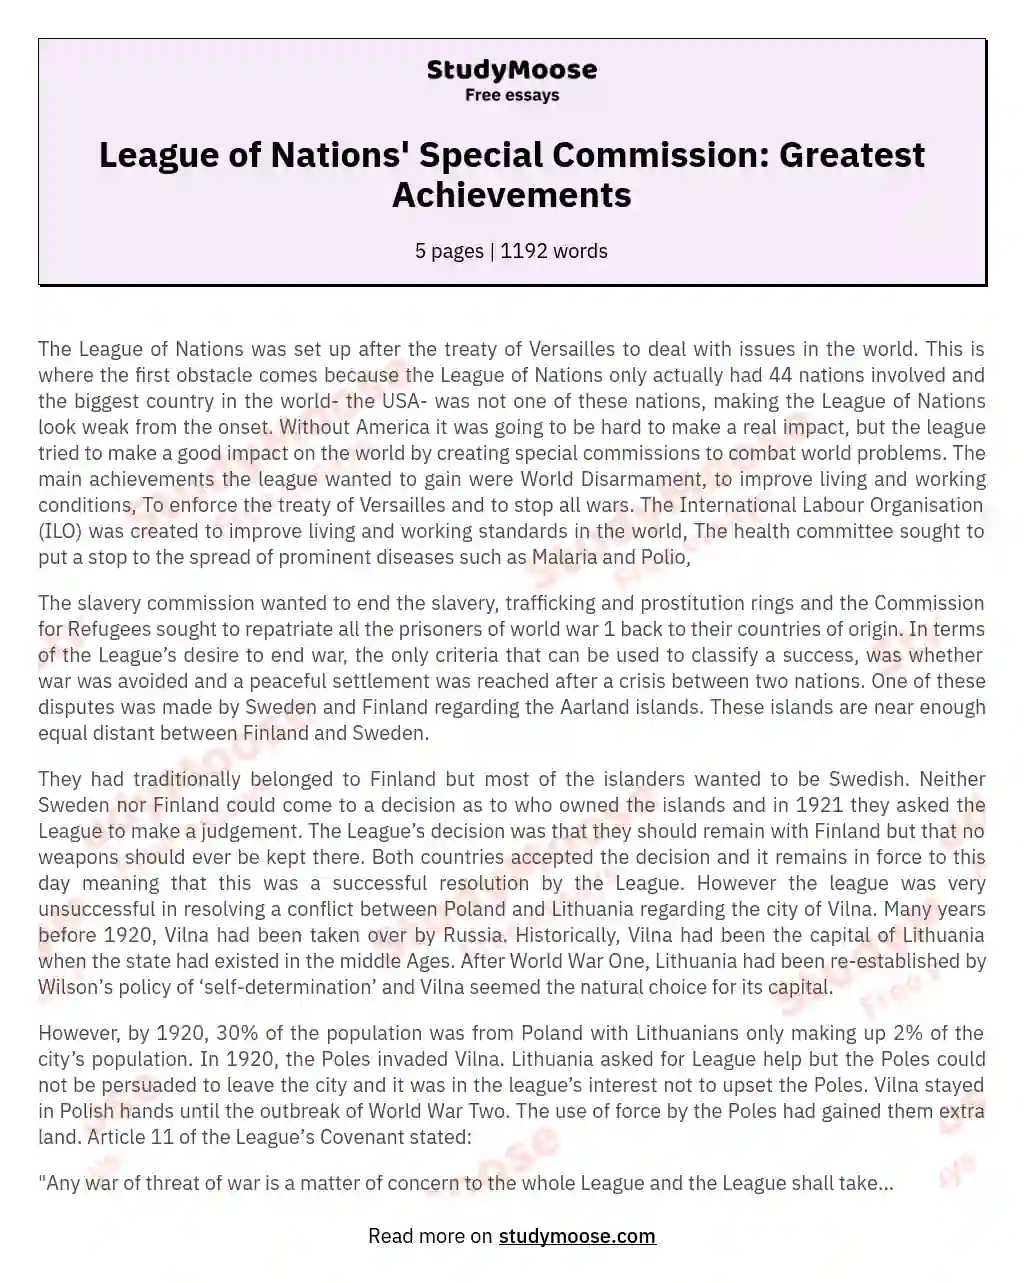 The League of Nations Had Its Greatest Successes in the Work of the Special Commission